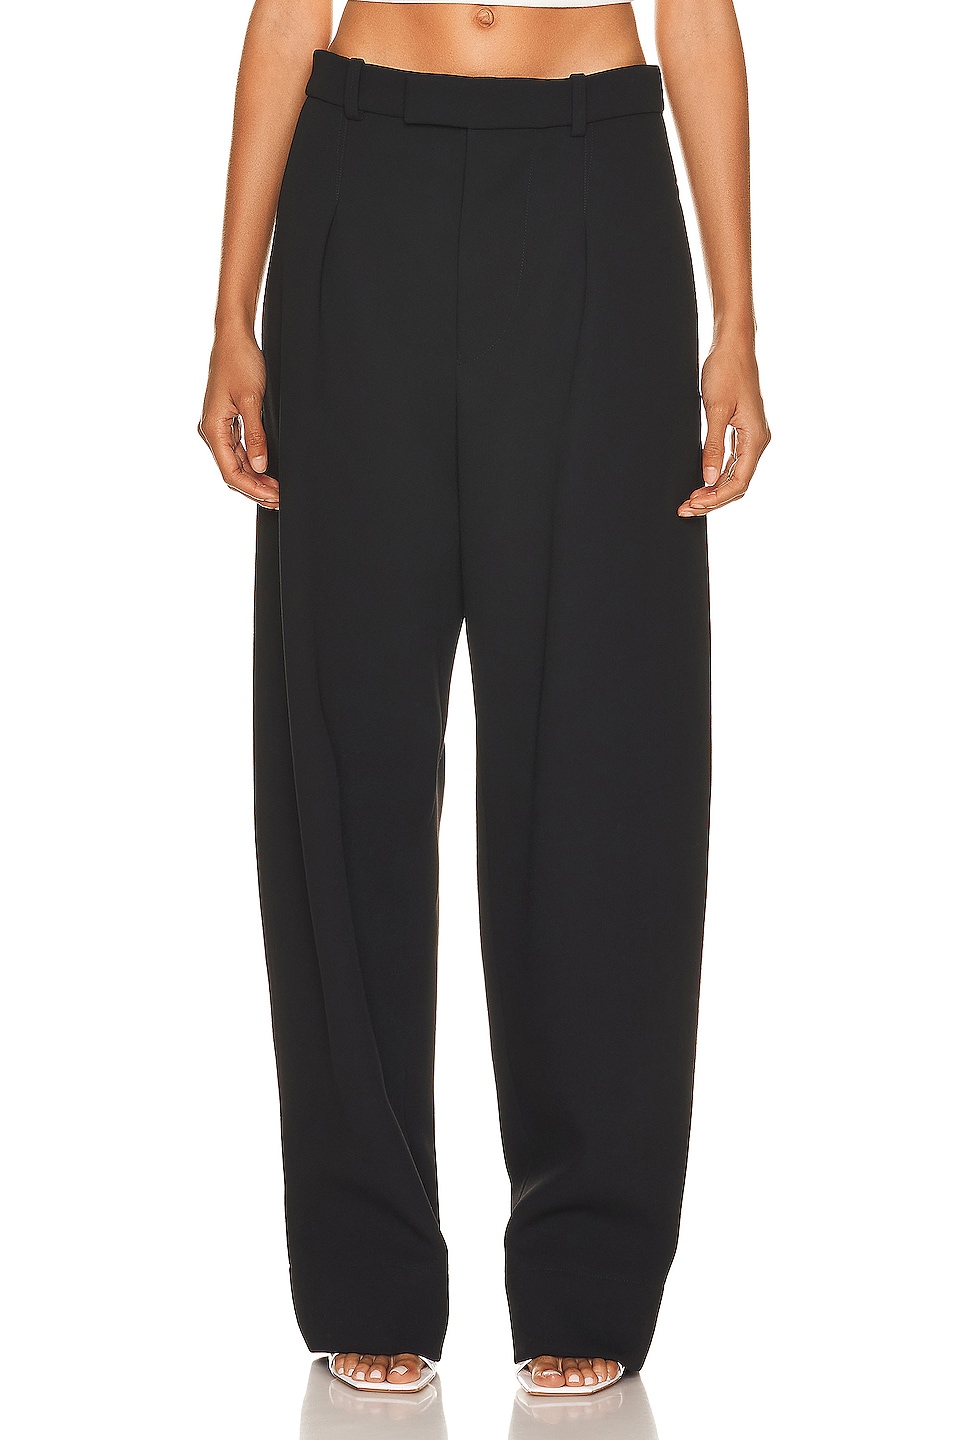 Image 1 of WARDROBE.NYC x Hailey Bieber Trouser Pant in Black